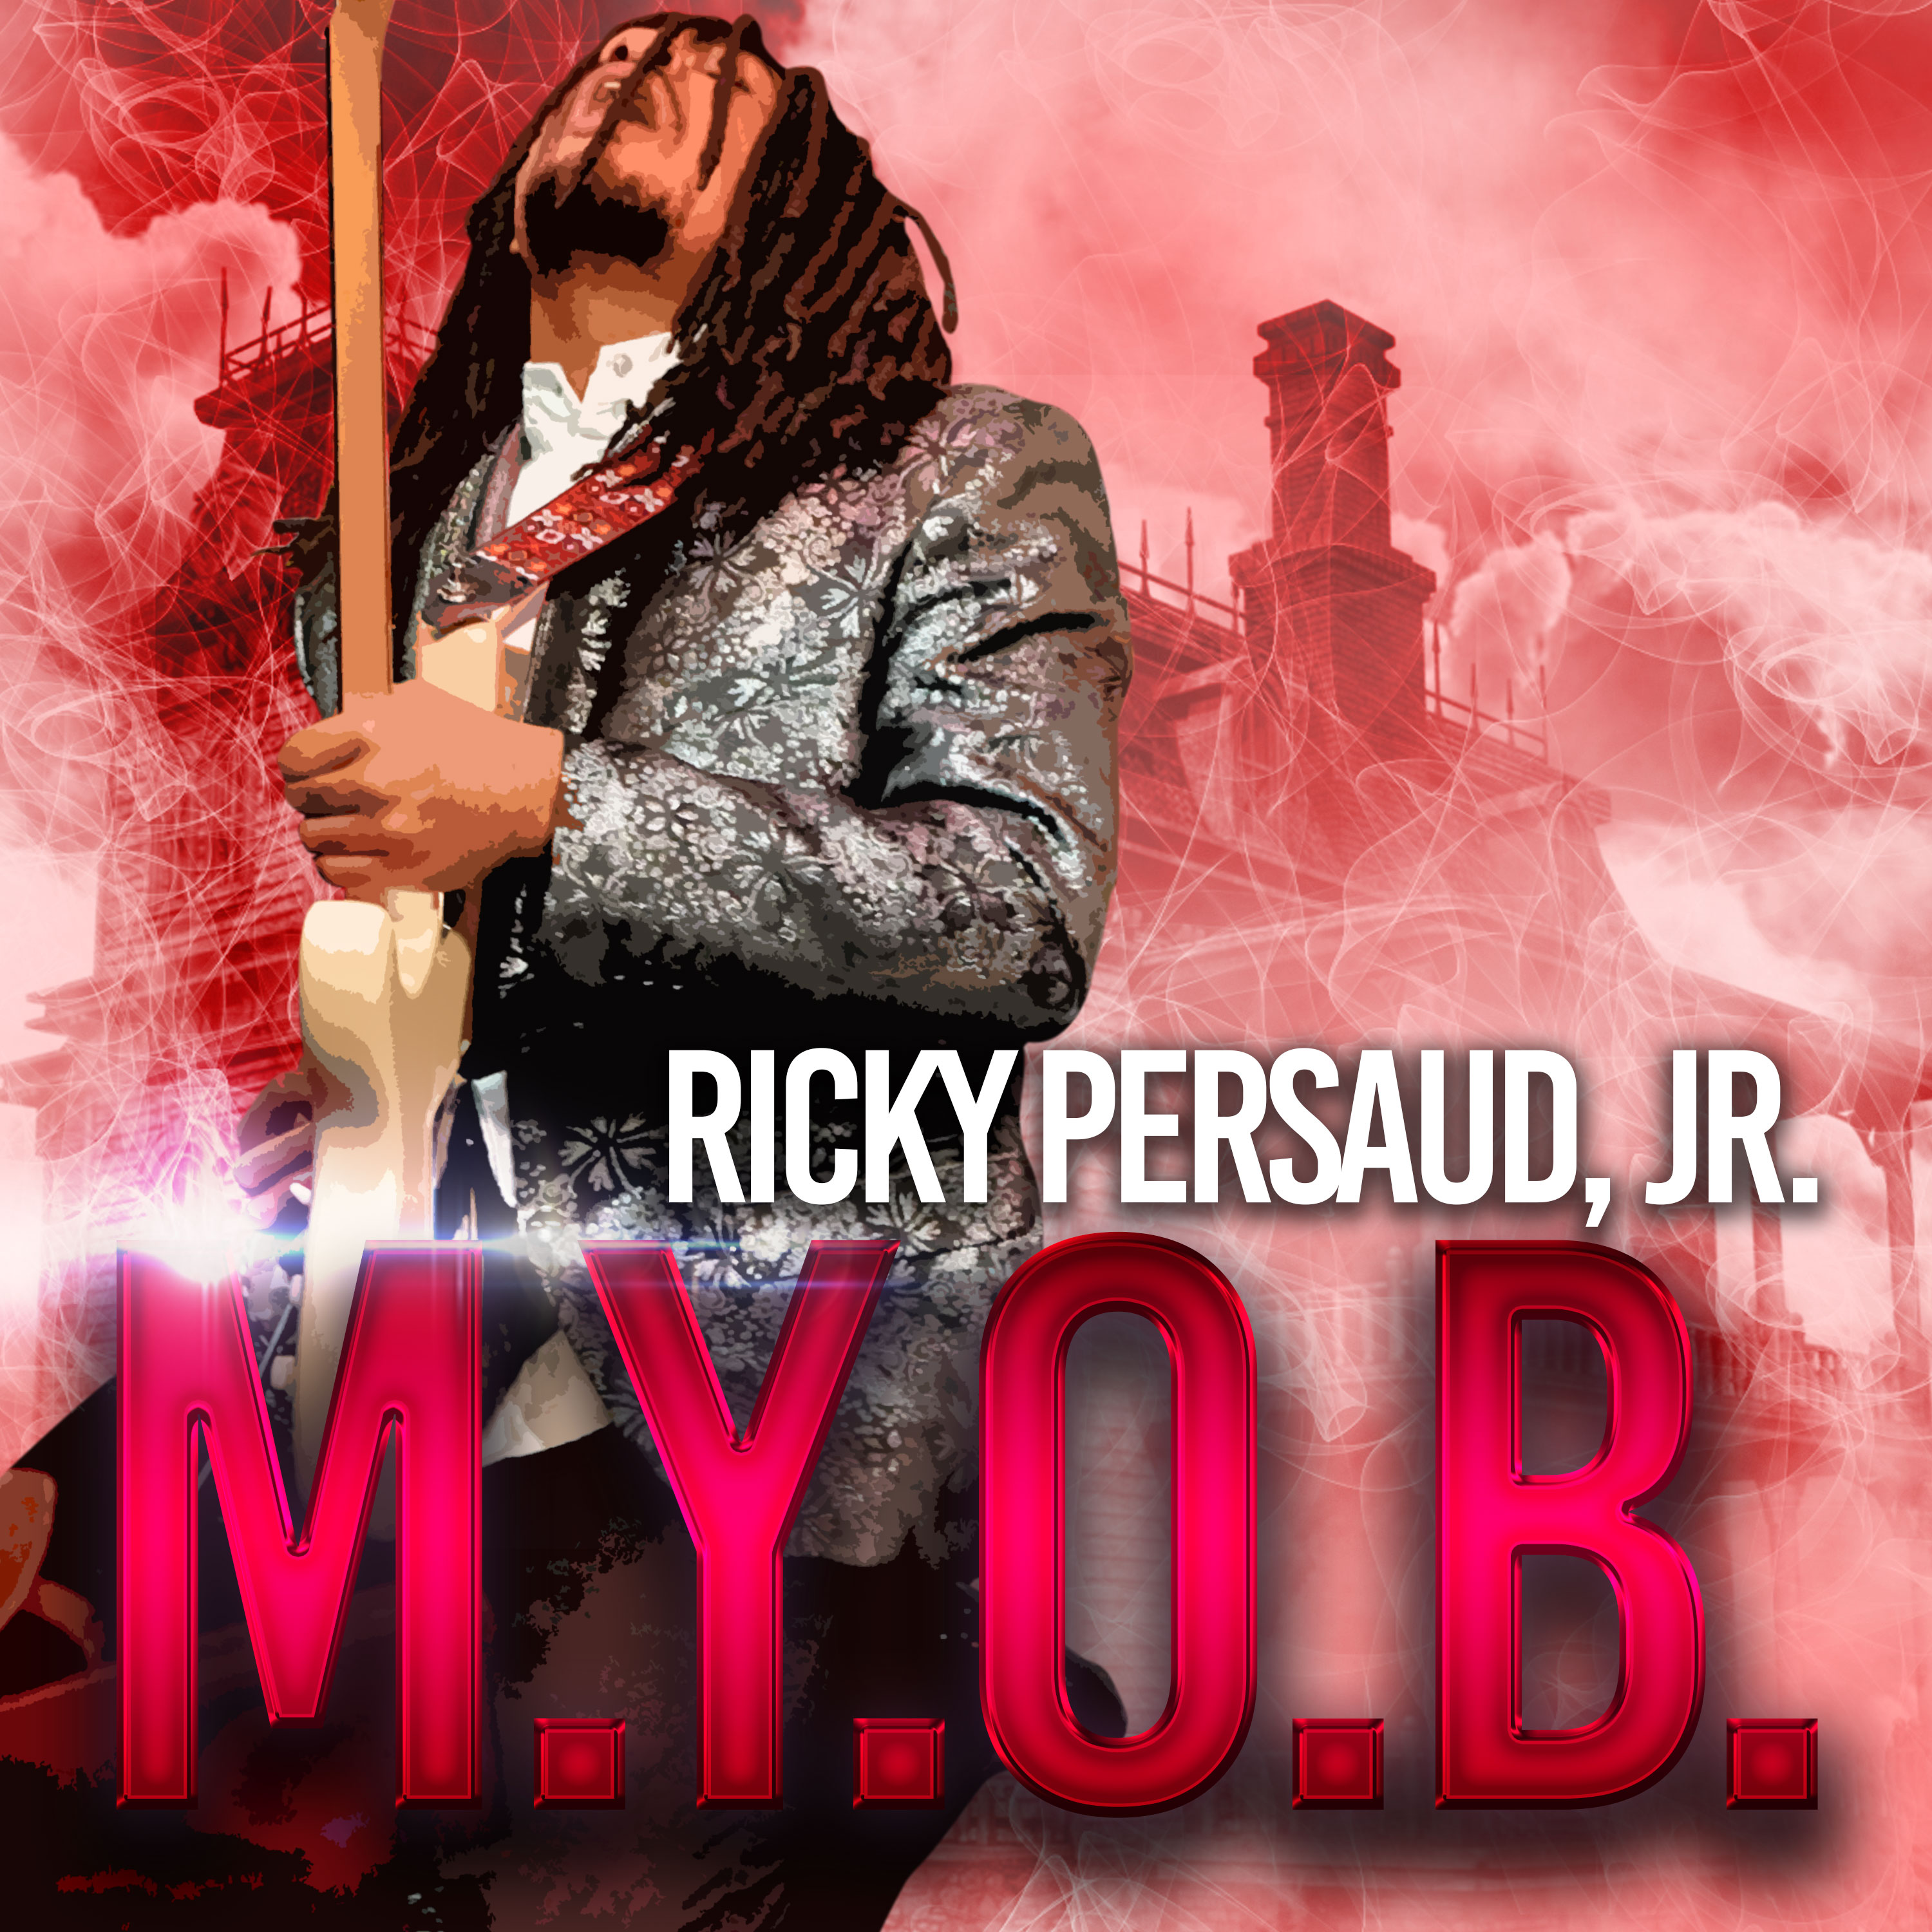 Multi-Intrumentalist Ricky Persaud, Jr. Back with New Album; Follow Up to 2019 EPs Pursuit of Happiness and Apocalypse, First Single "M.Y.O.B." Out Now